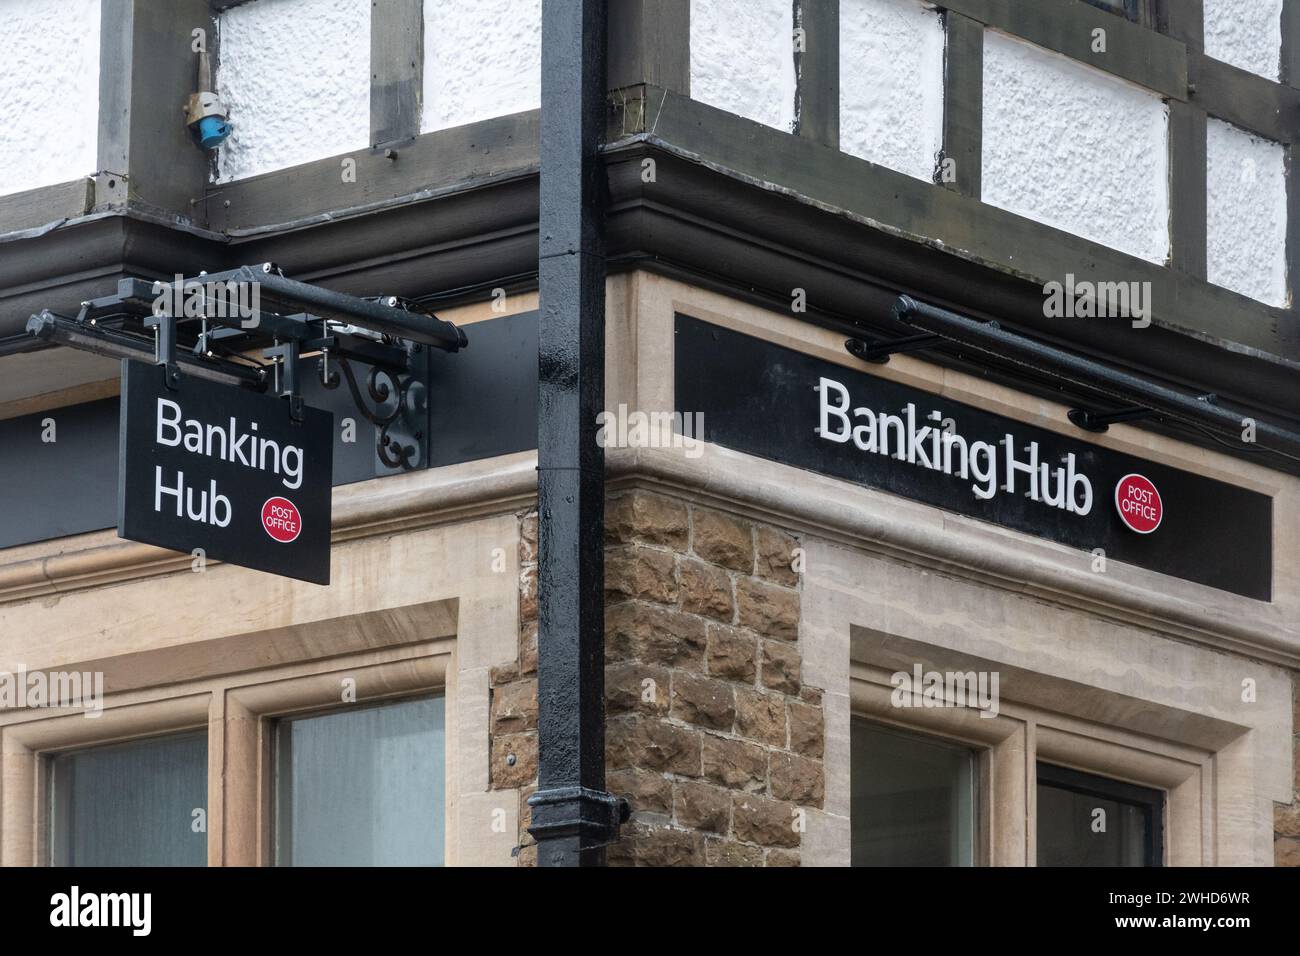 Banking hub run by post office in Haslemere town, Surrey, England, UK. Hubs are shared spaces on the high street serving customers of multiple banks. Stock Photo